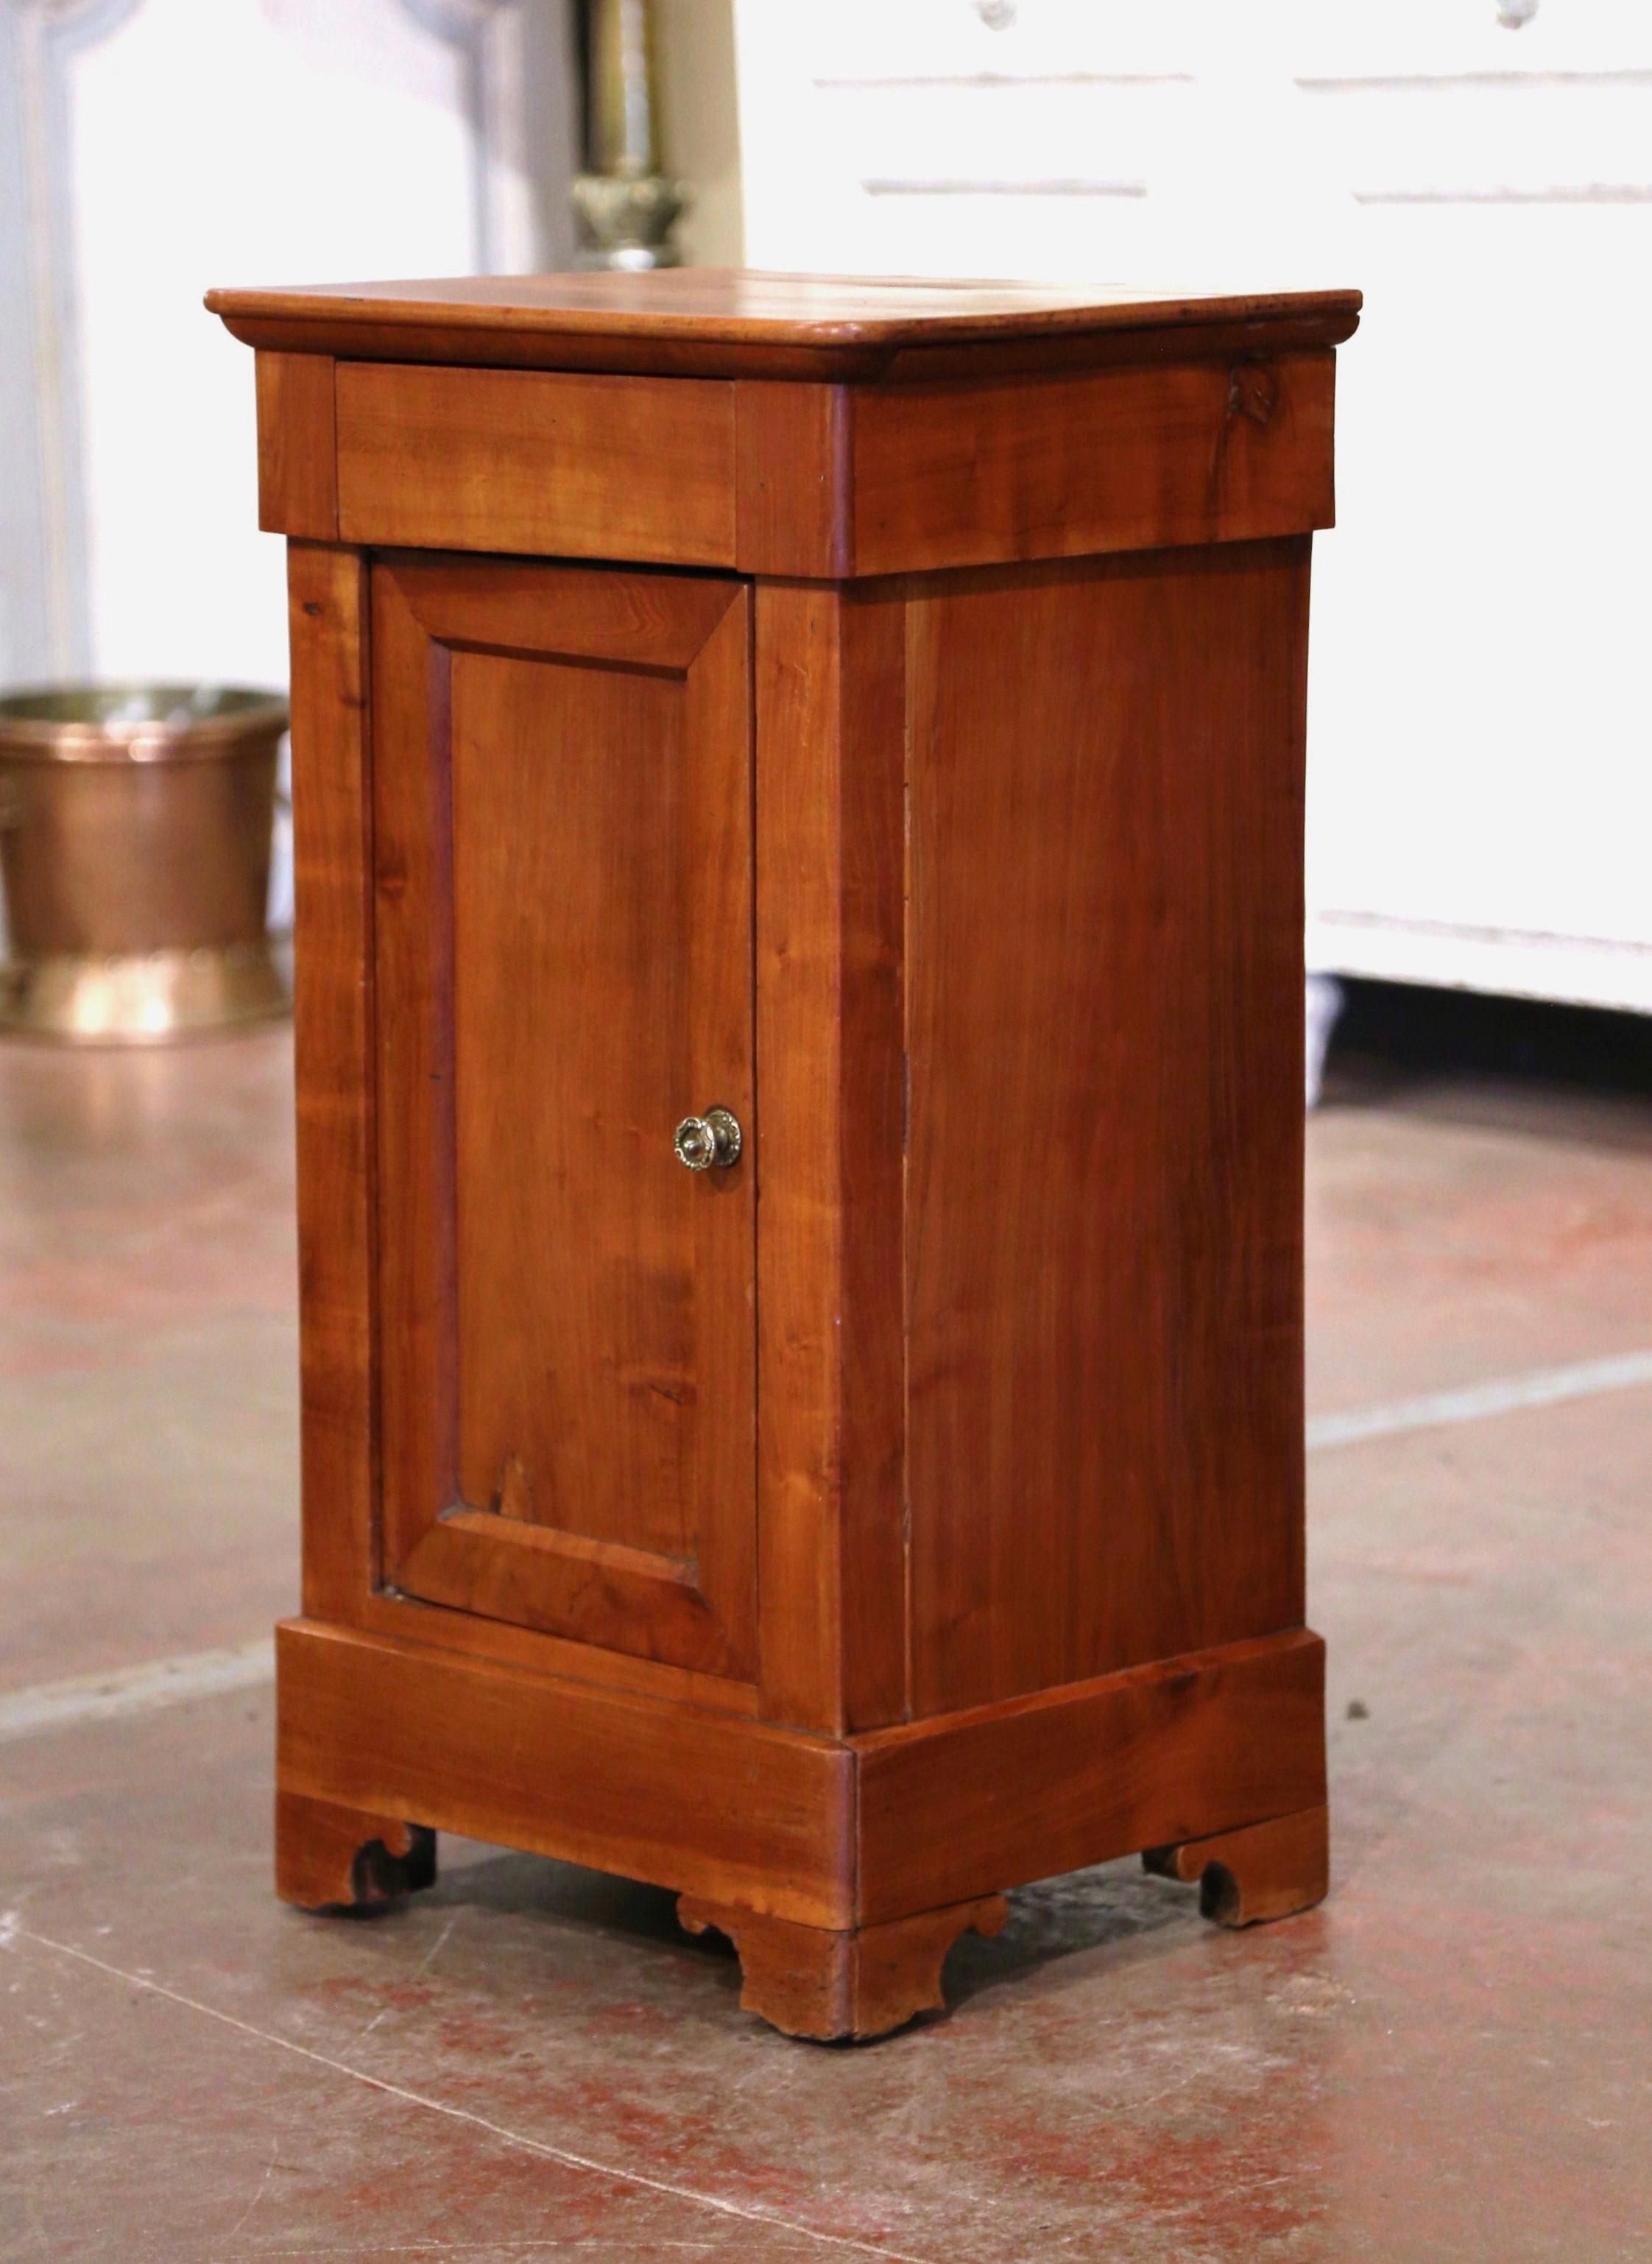 This elegant antique nightstand was crafted in France, circa 1890. The fruit wood cabinet stands on bracket feet over a straight plinth; it features a single frieze drawer over a large door decorated with recessed panel. The cabinet opens to inside